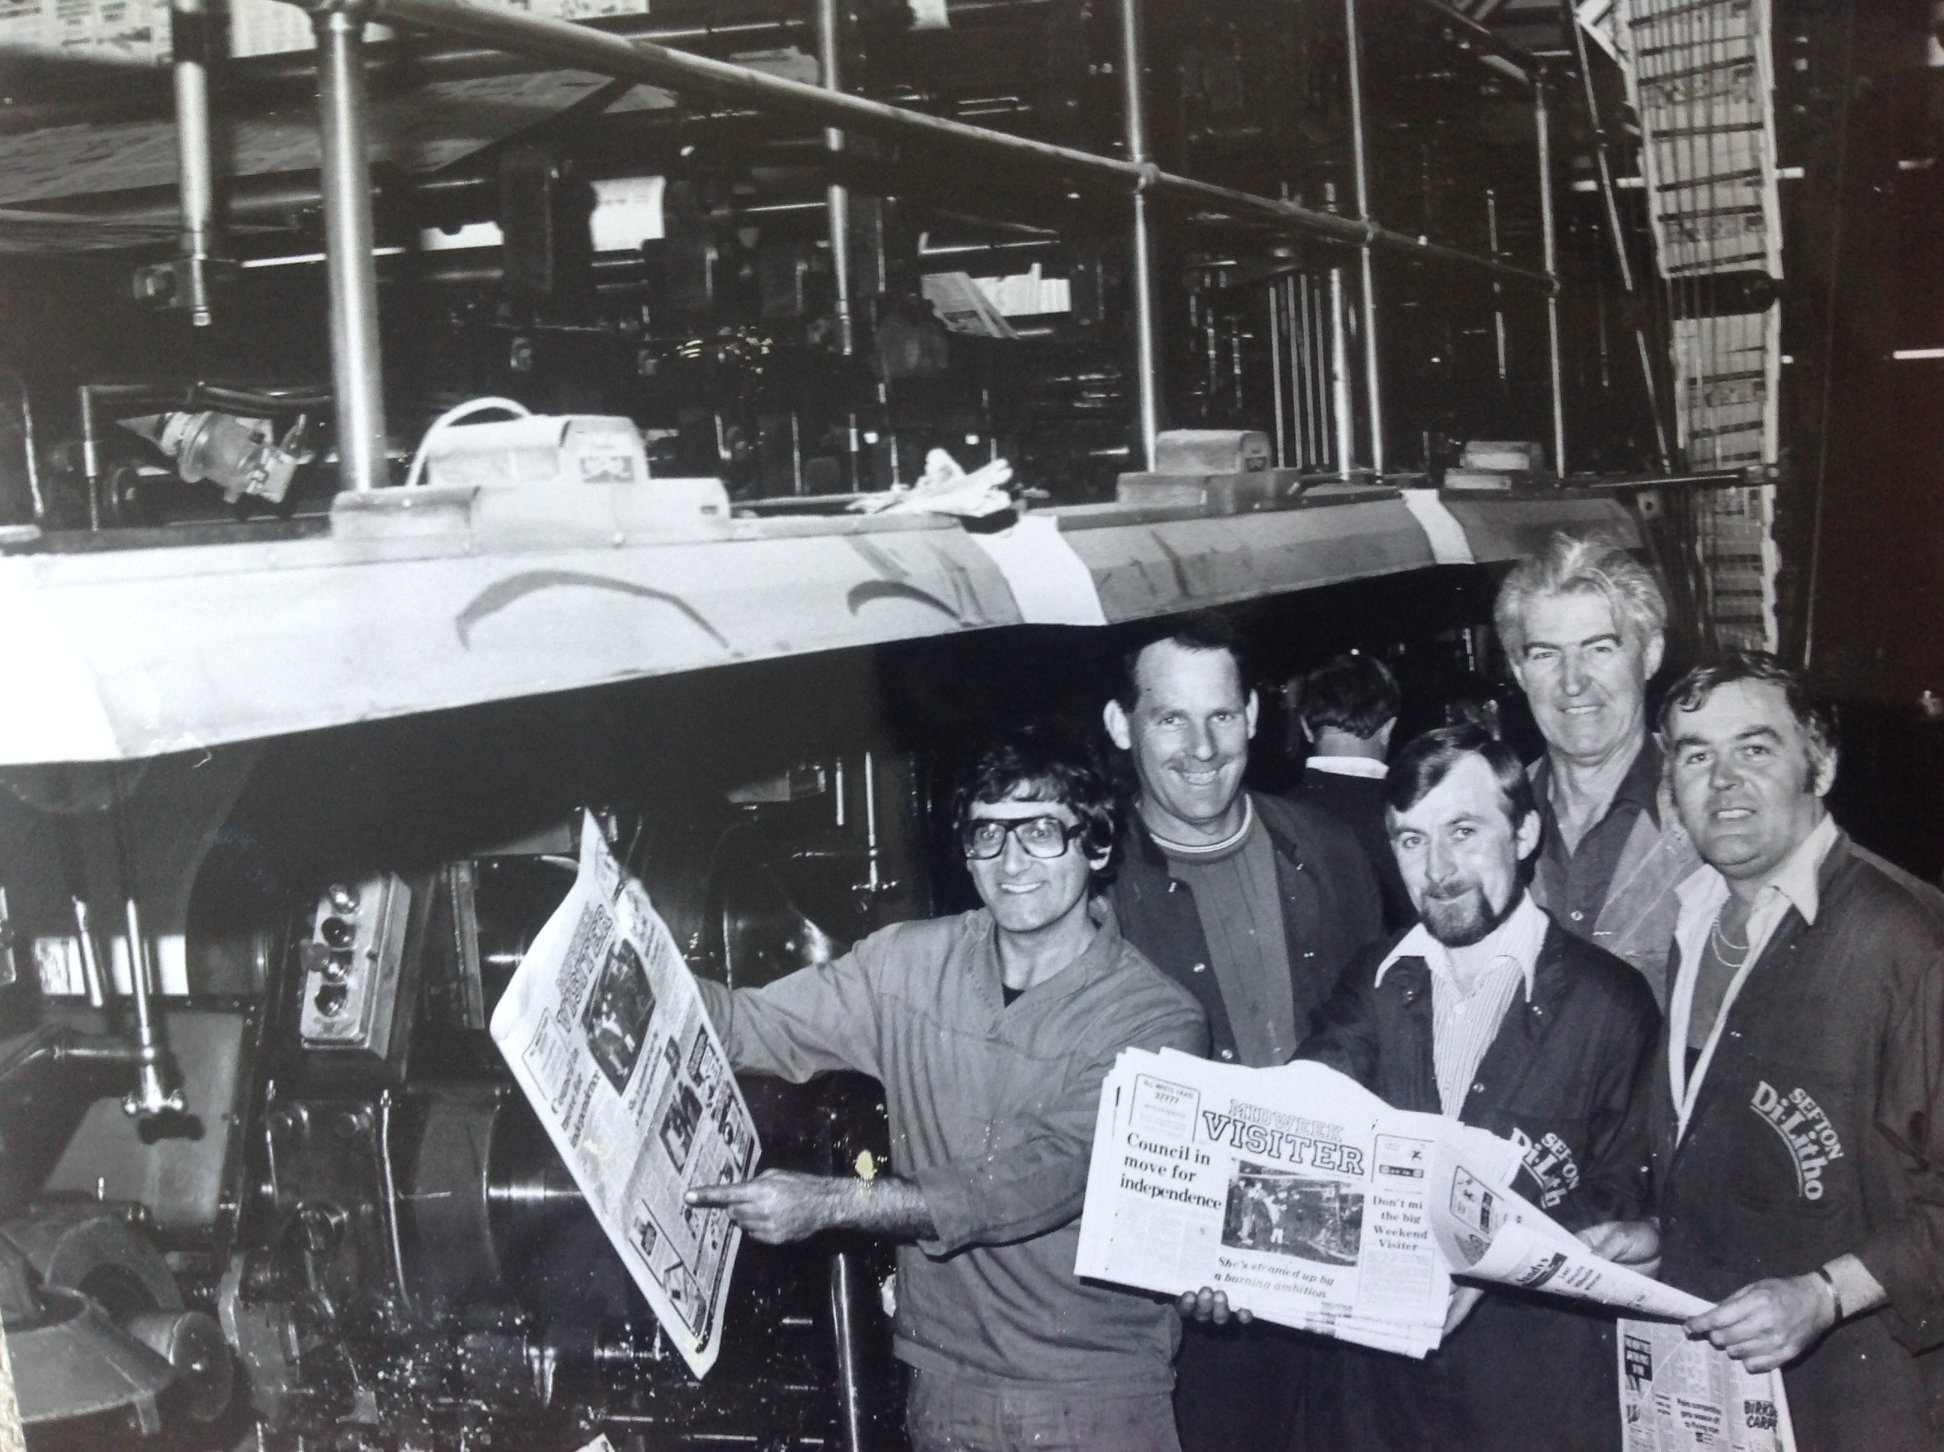 Southport Visiter staff with copies of the newspaper next to the printing press at the Southport Visiter office on Tulketh Street in Southport